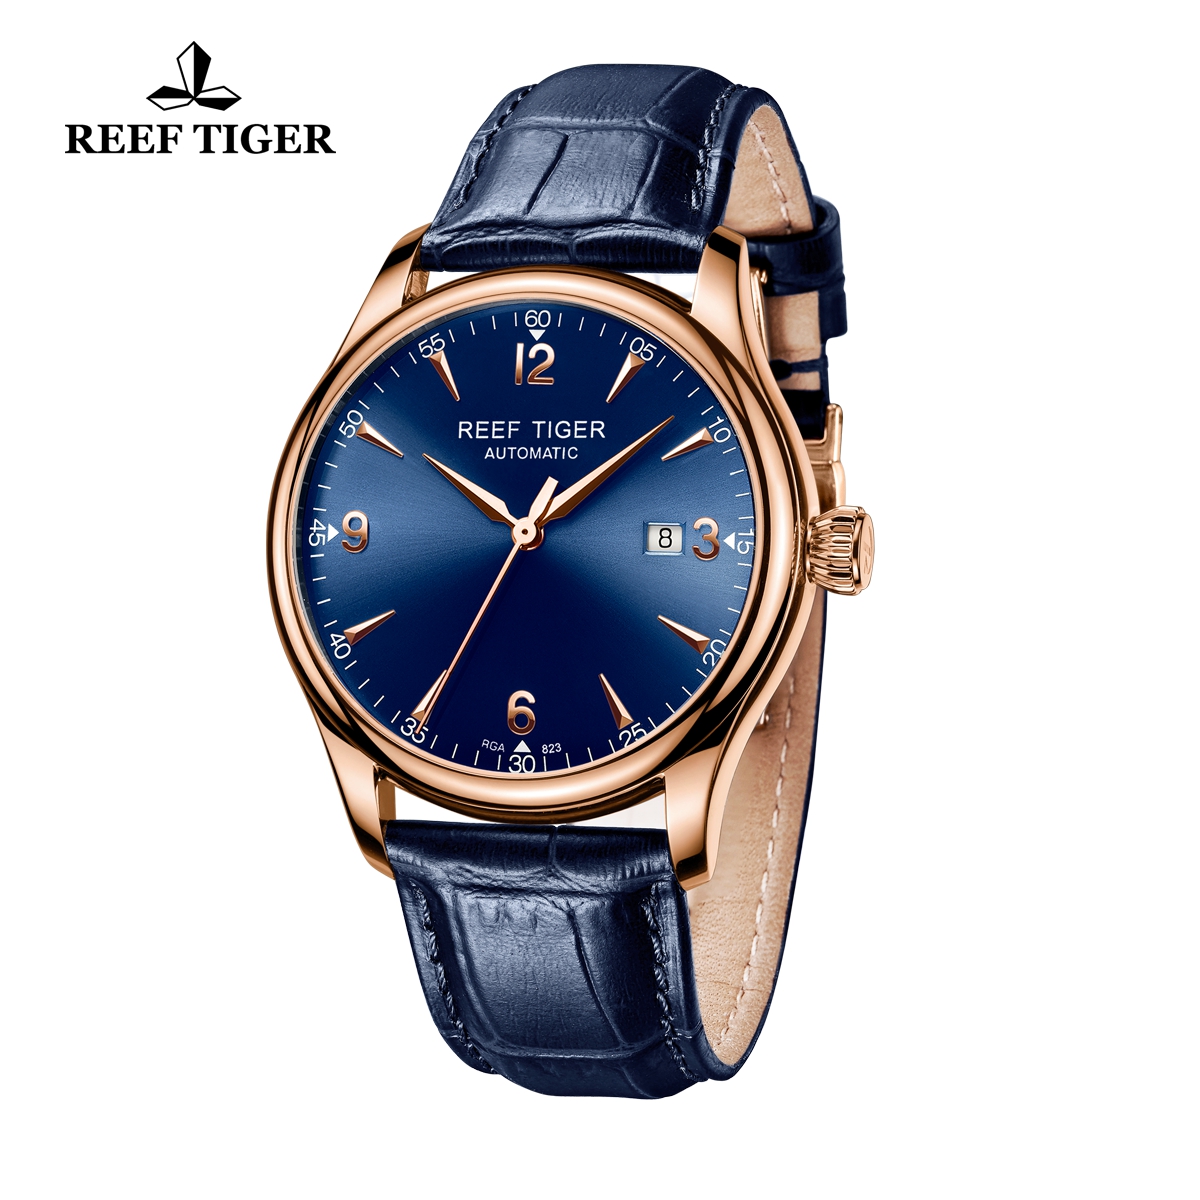 Reef Tiger Heritage Dress Automatic Watch Blue Dial Calfskin Leather Strap RGA823G-PLL